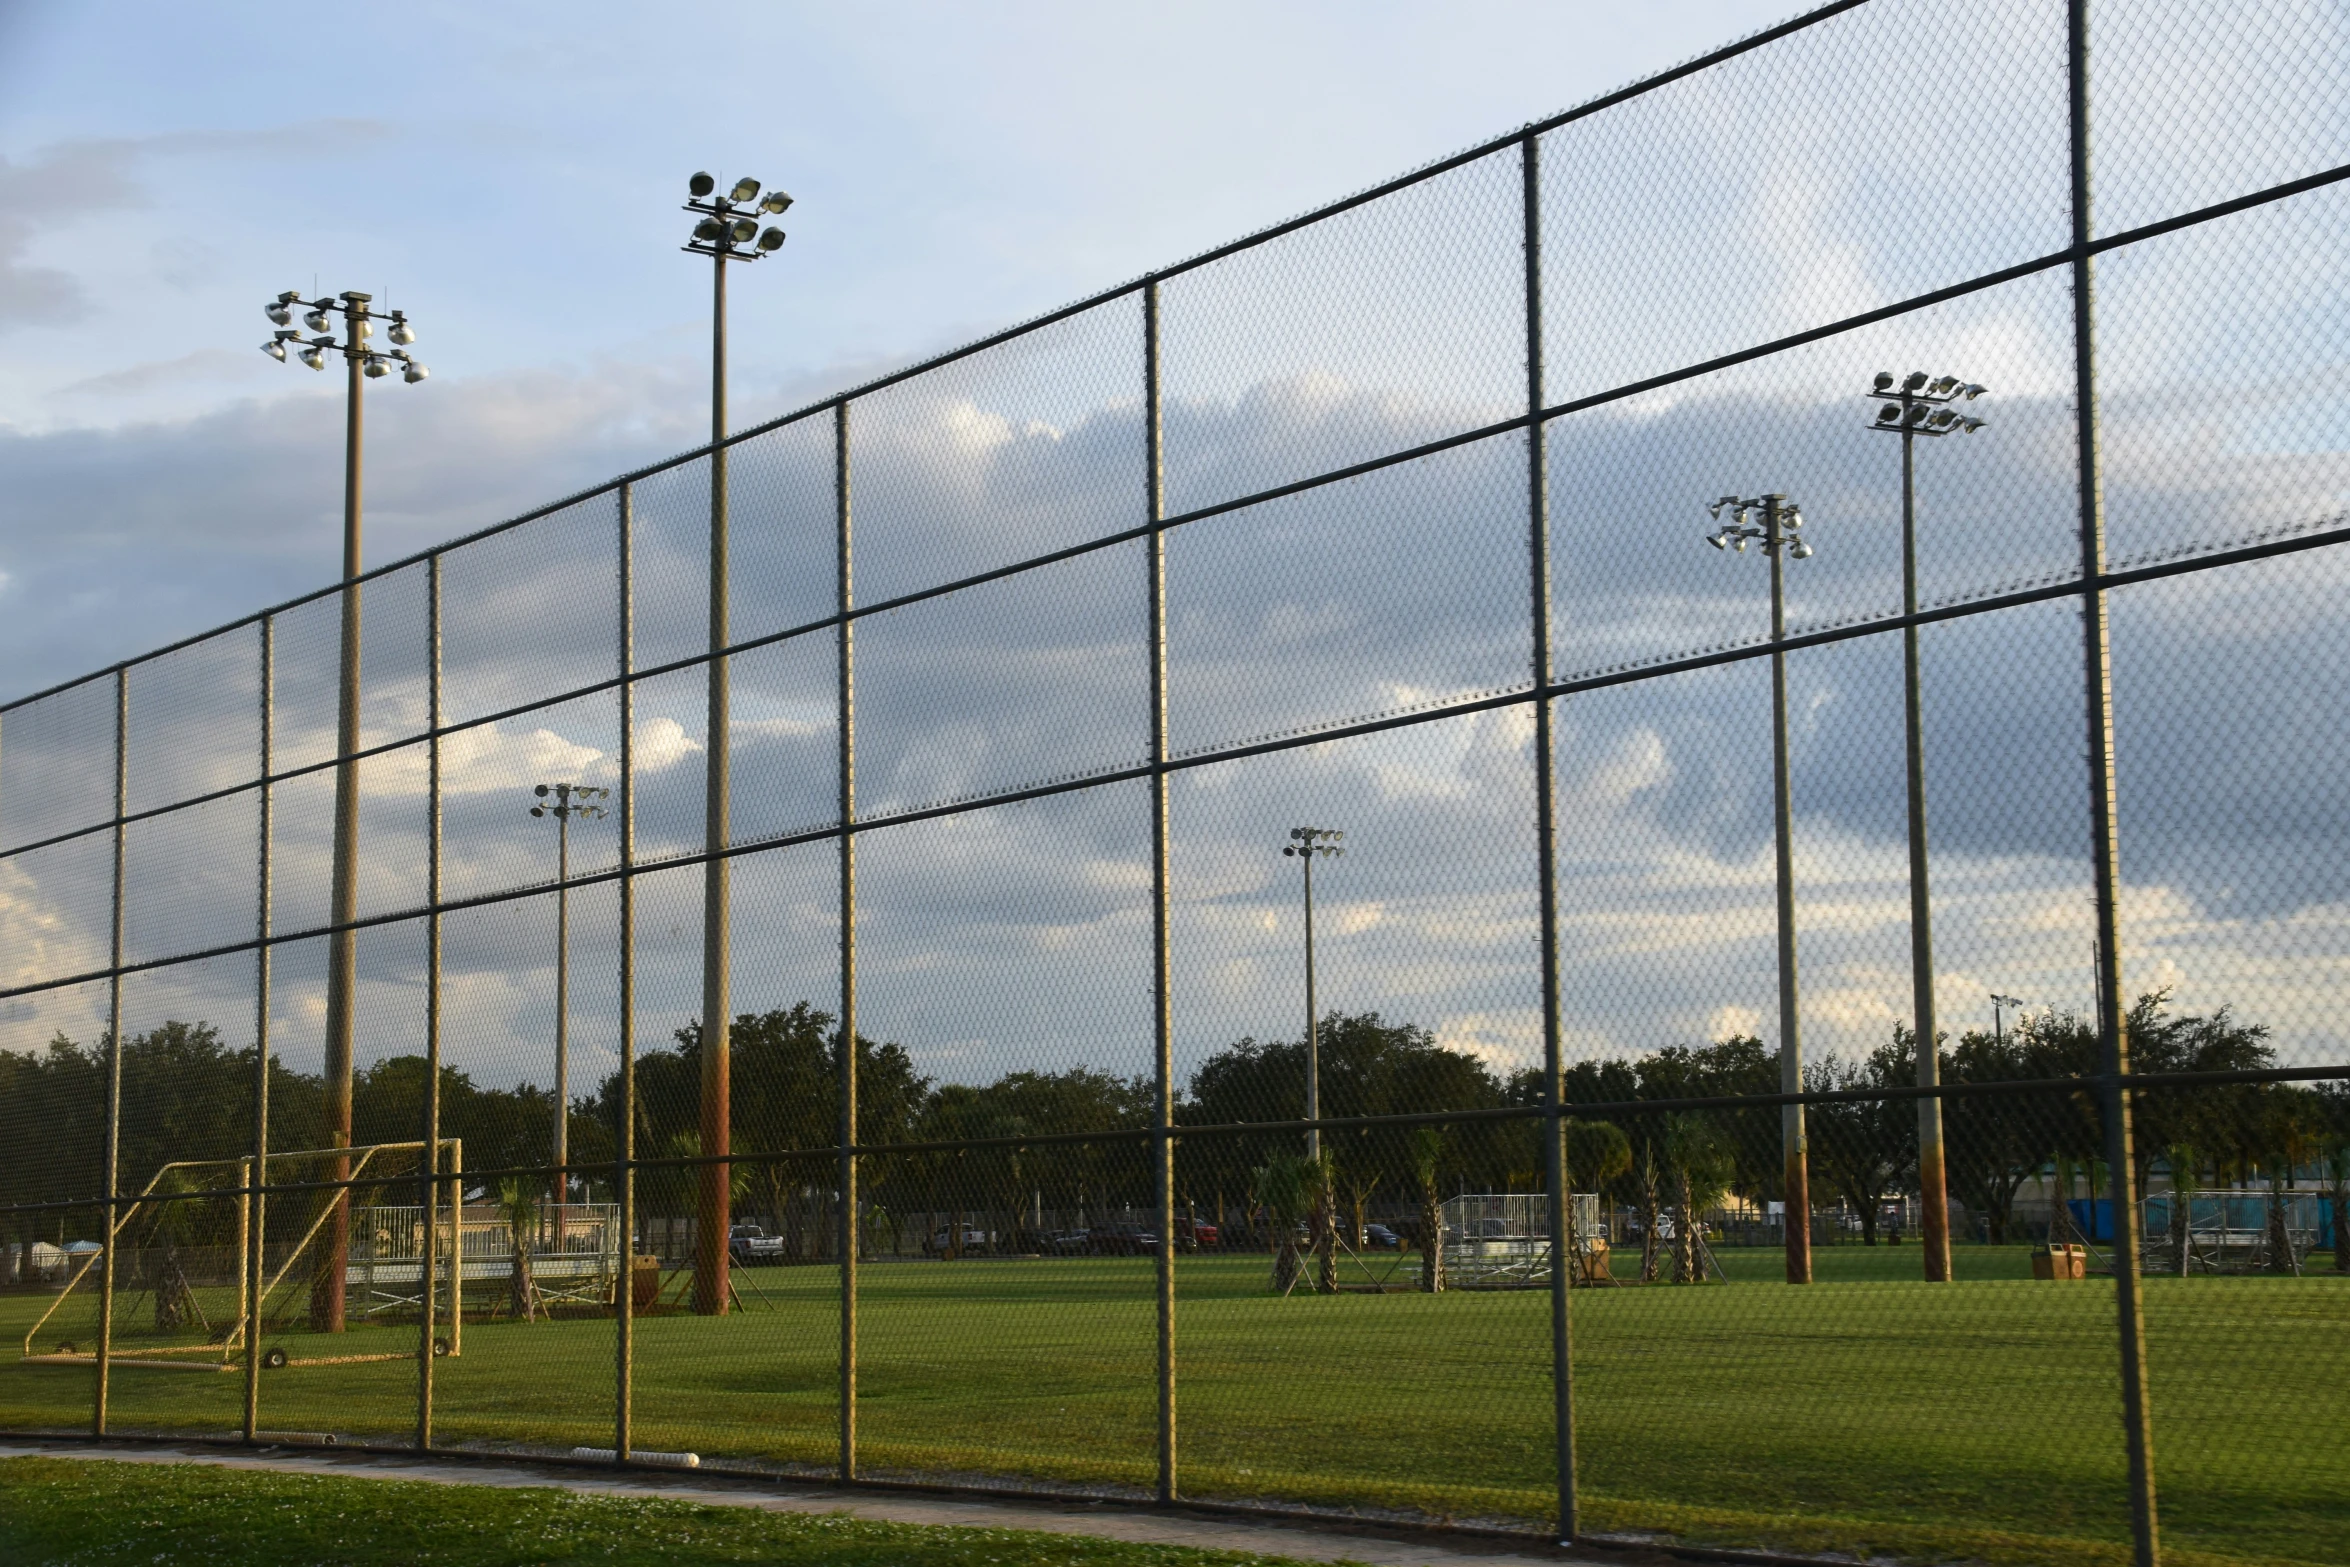 the soccer field is lined with tall poles